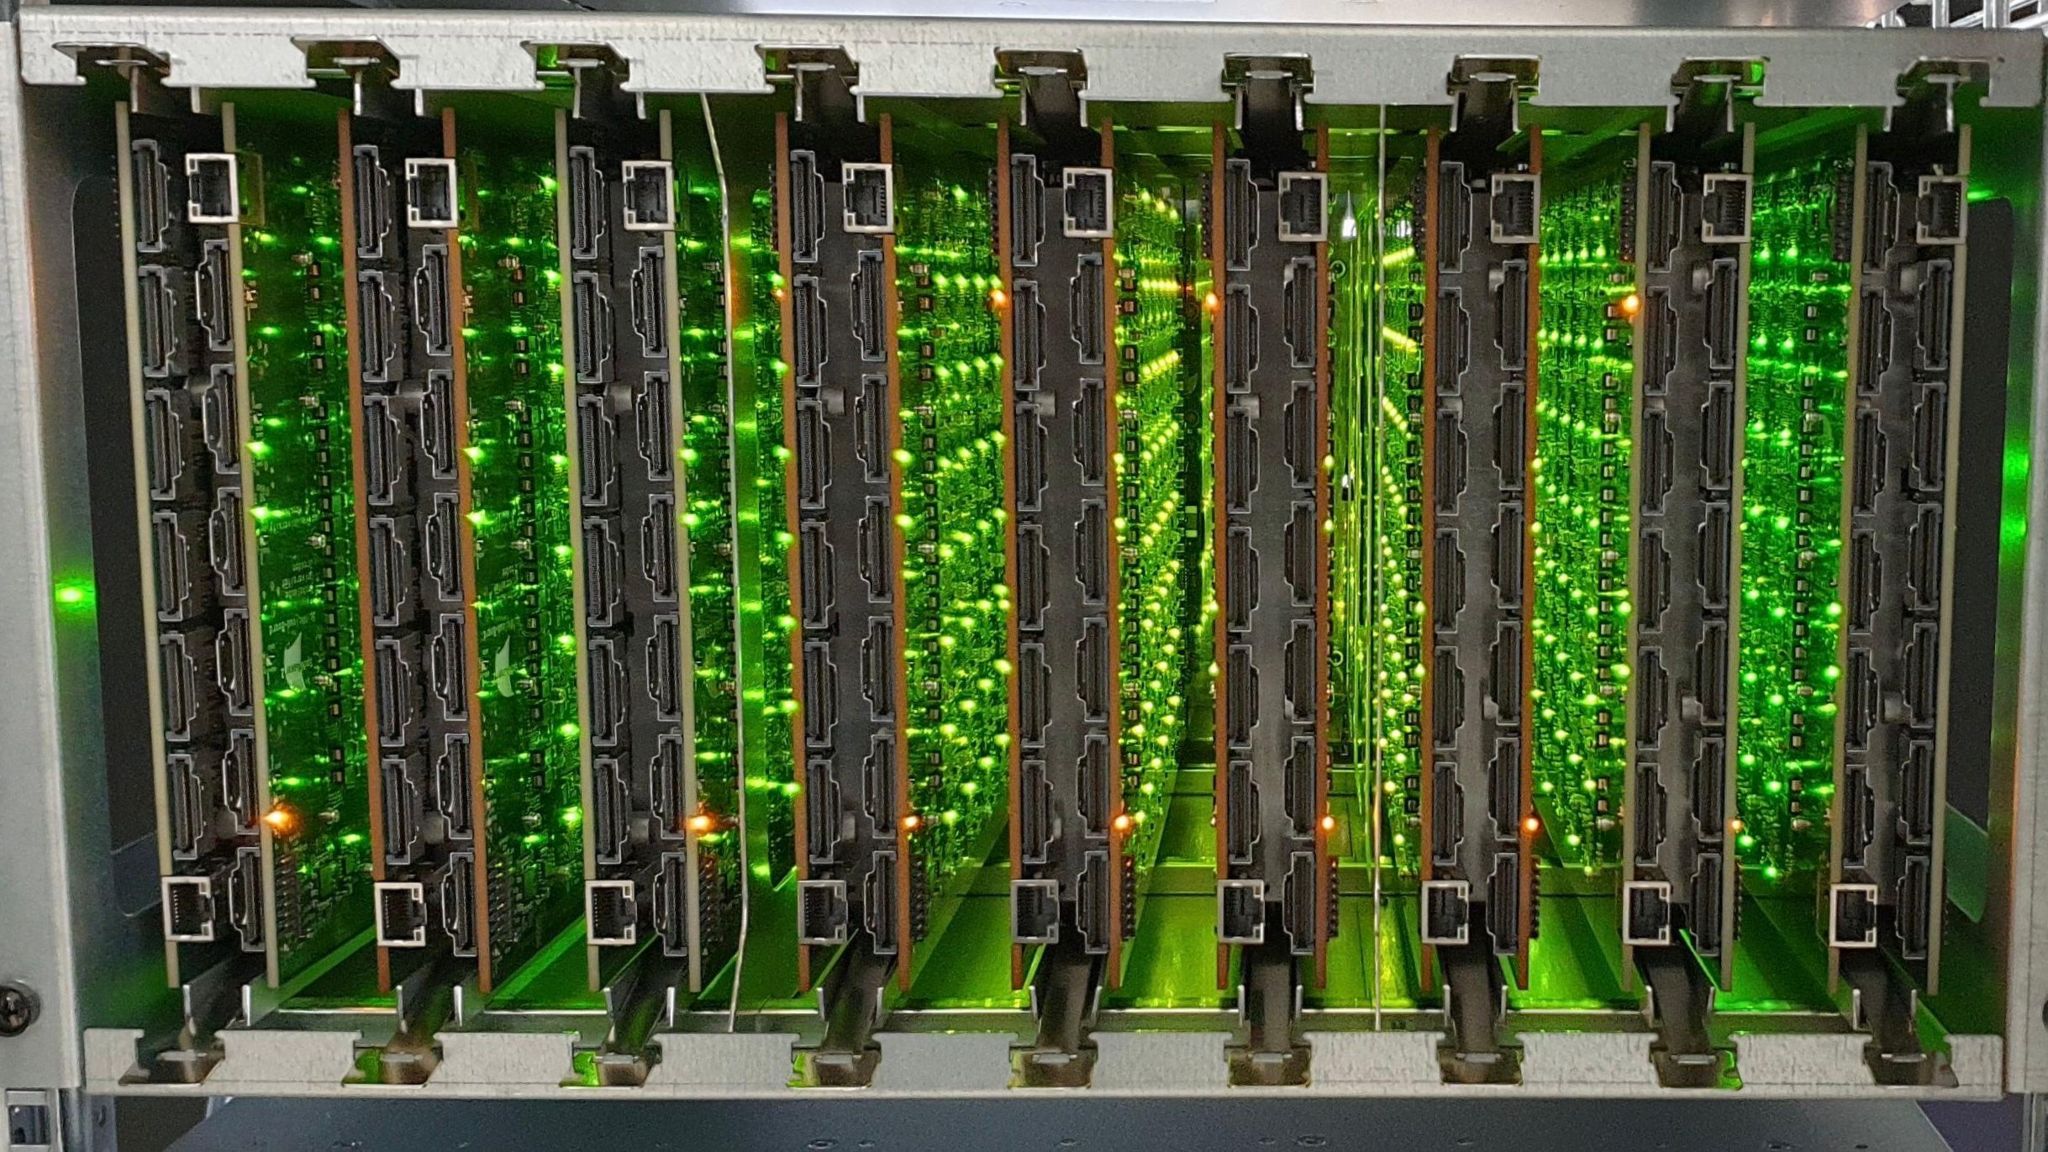 Racks of SpiNNcloud computer chips